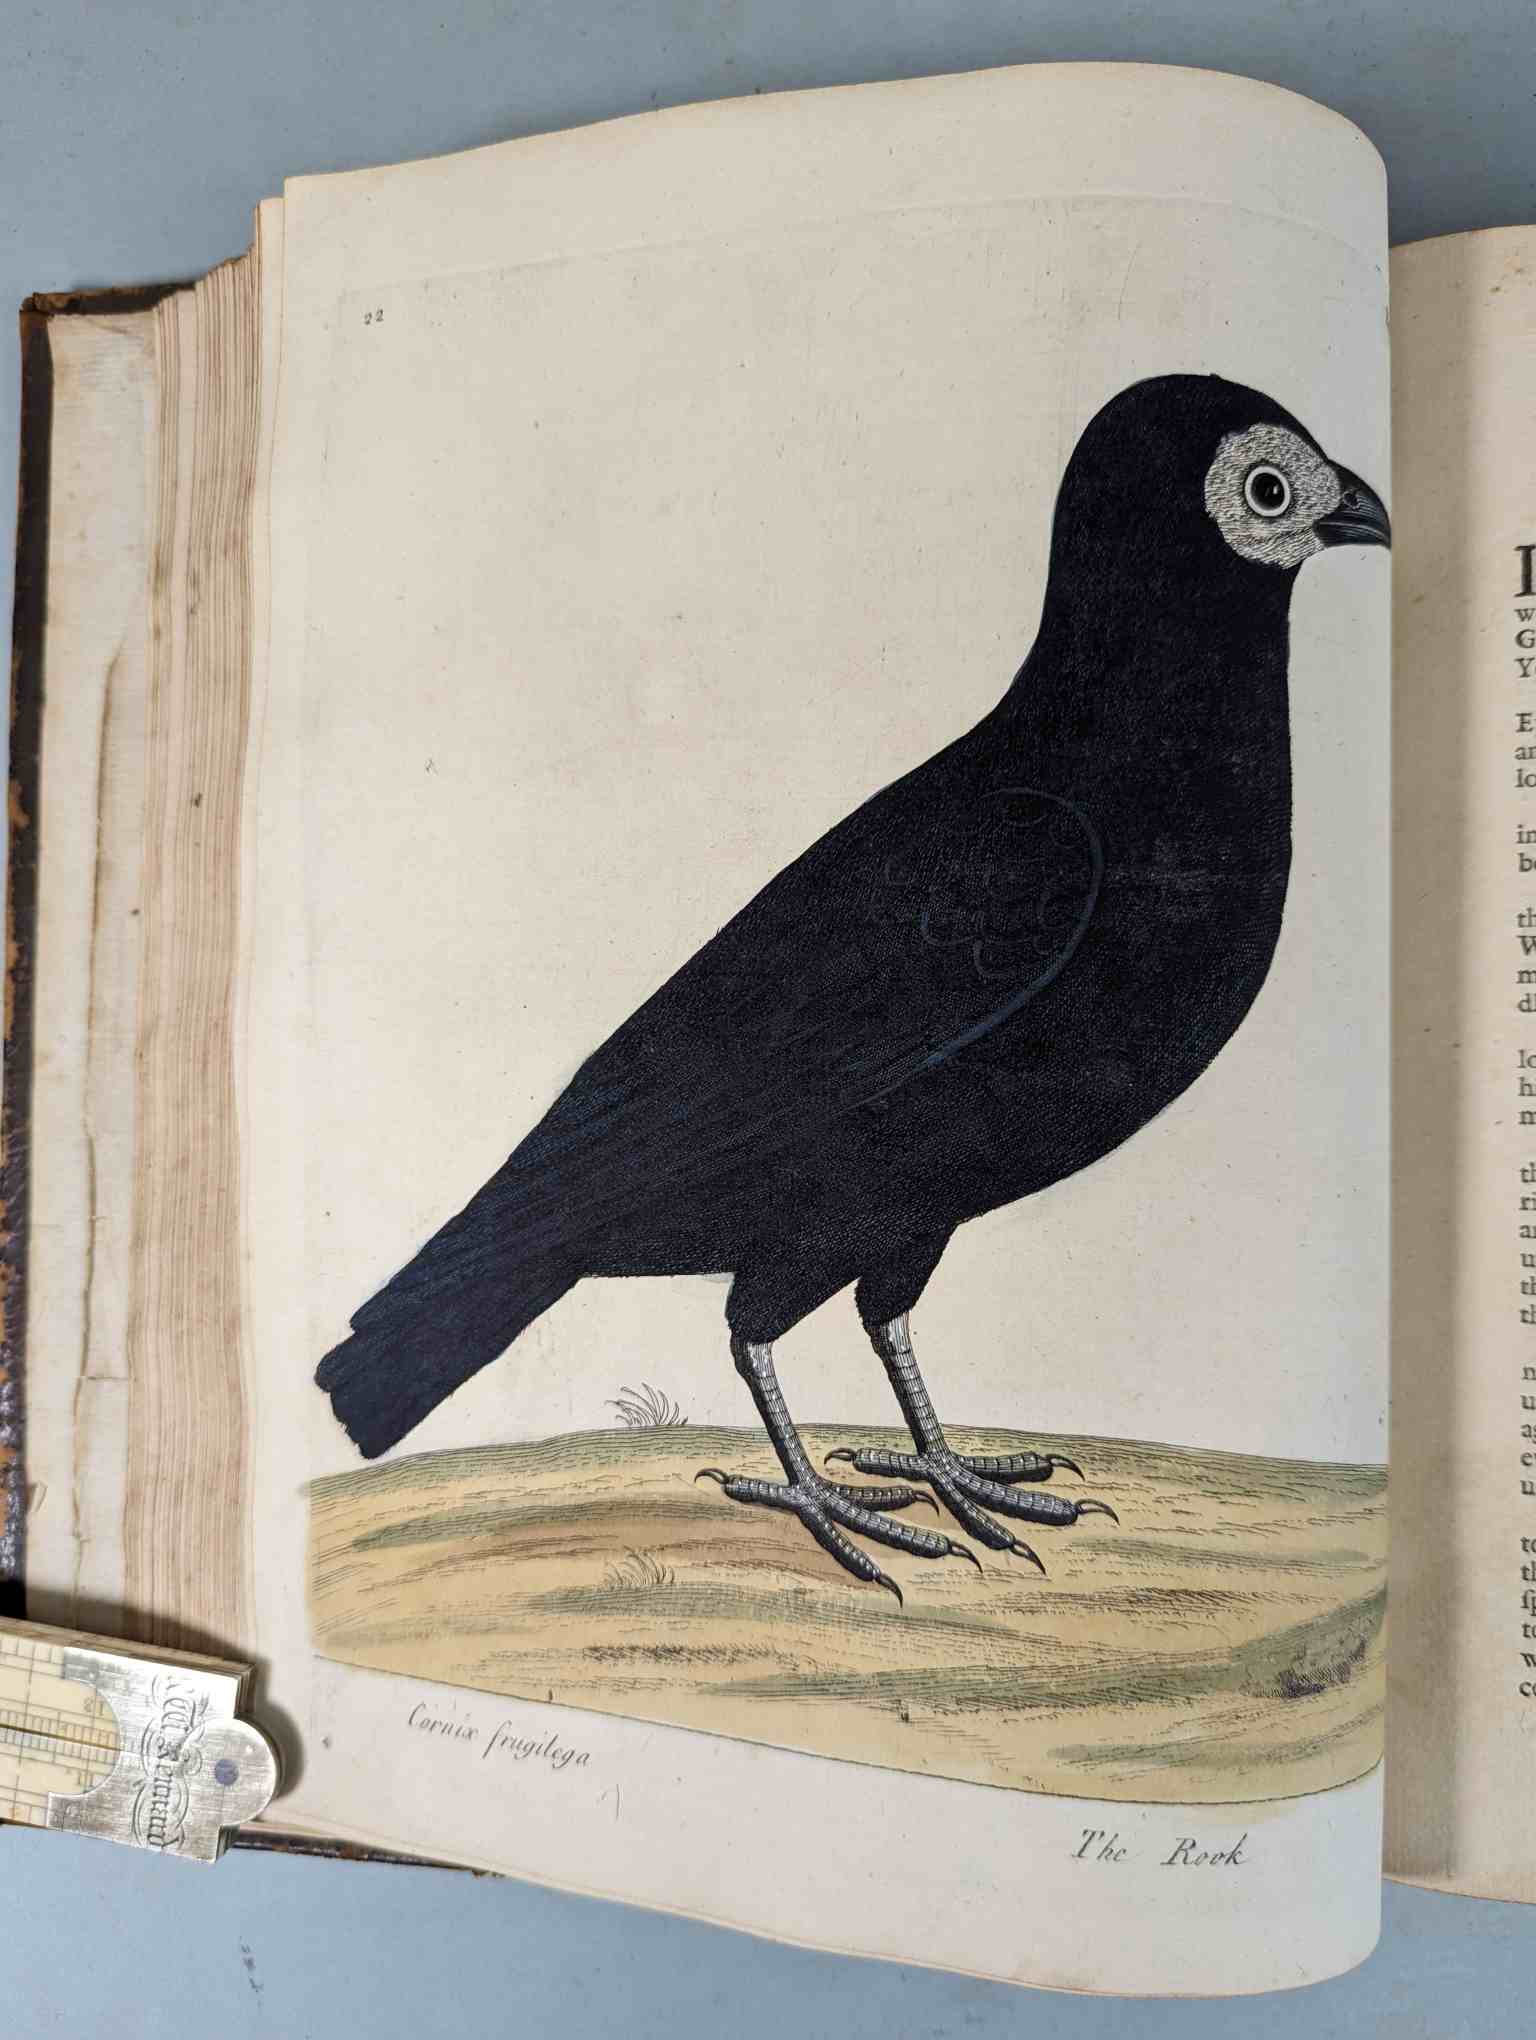 ALBIN, Eleazar. A Natural History of Birds, to which are added, Notes and Observations by W. - Image 126 of 208